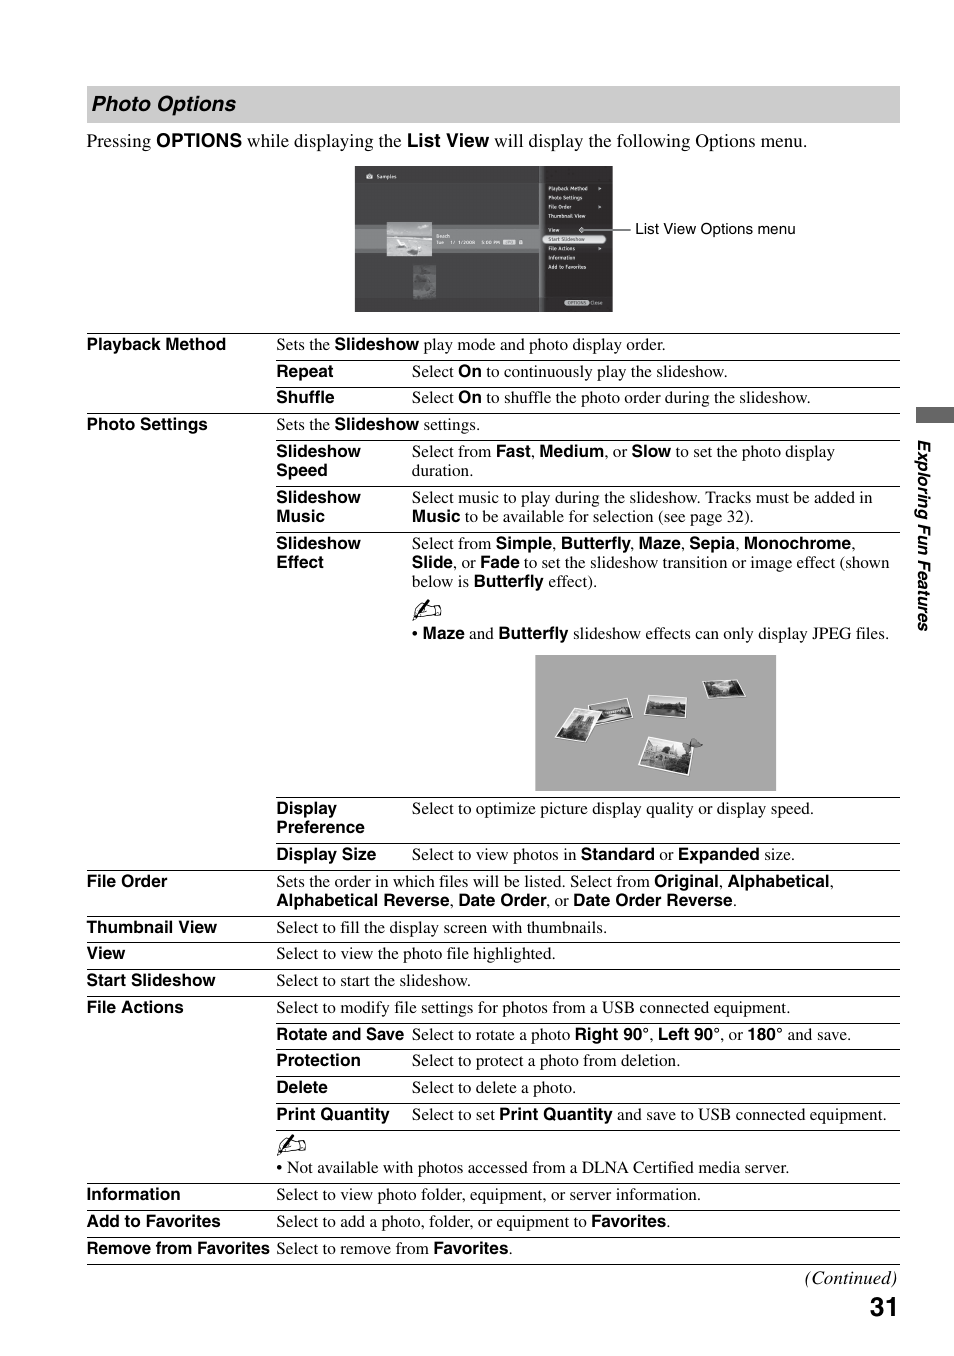 Photo options | Sony KDL-52XBR7 User Manual | Page 31 / 60